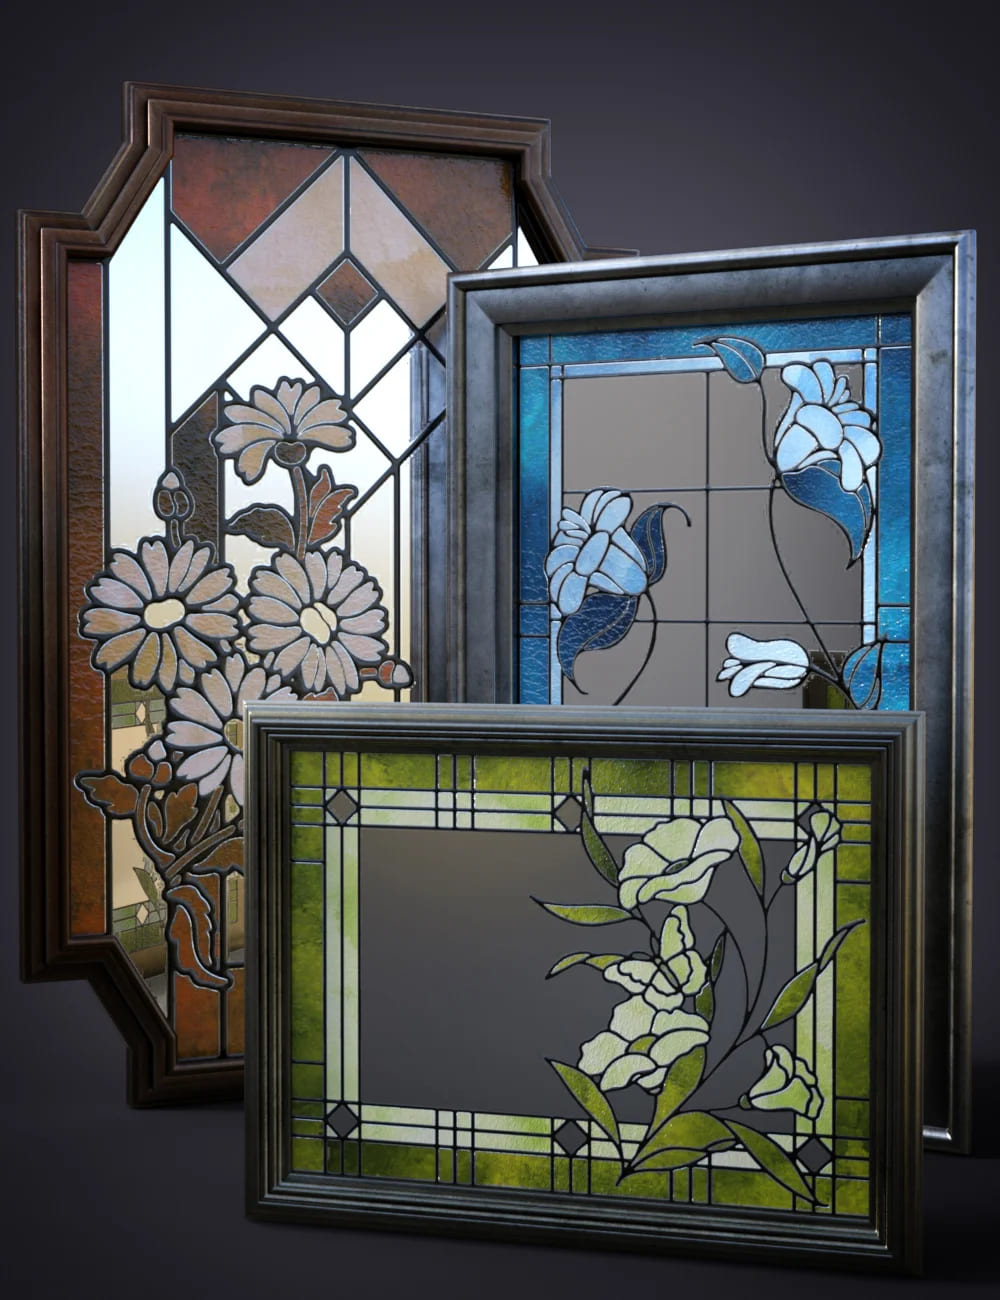 B.E.T.T.Y. Stained Glass Mirrors_DAZ3DDL